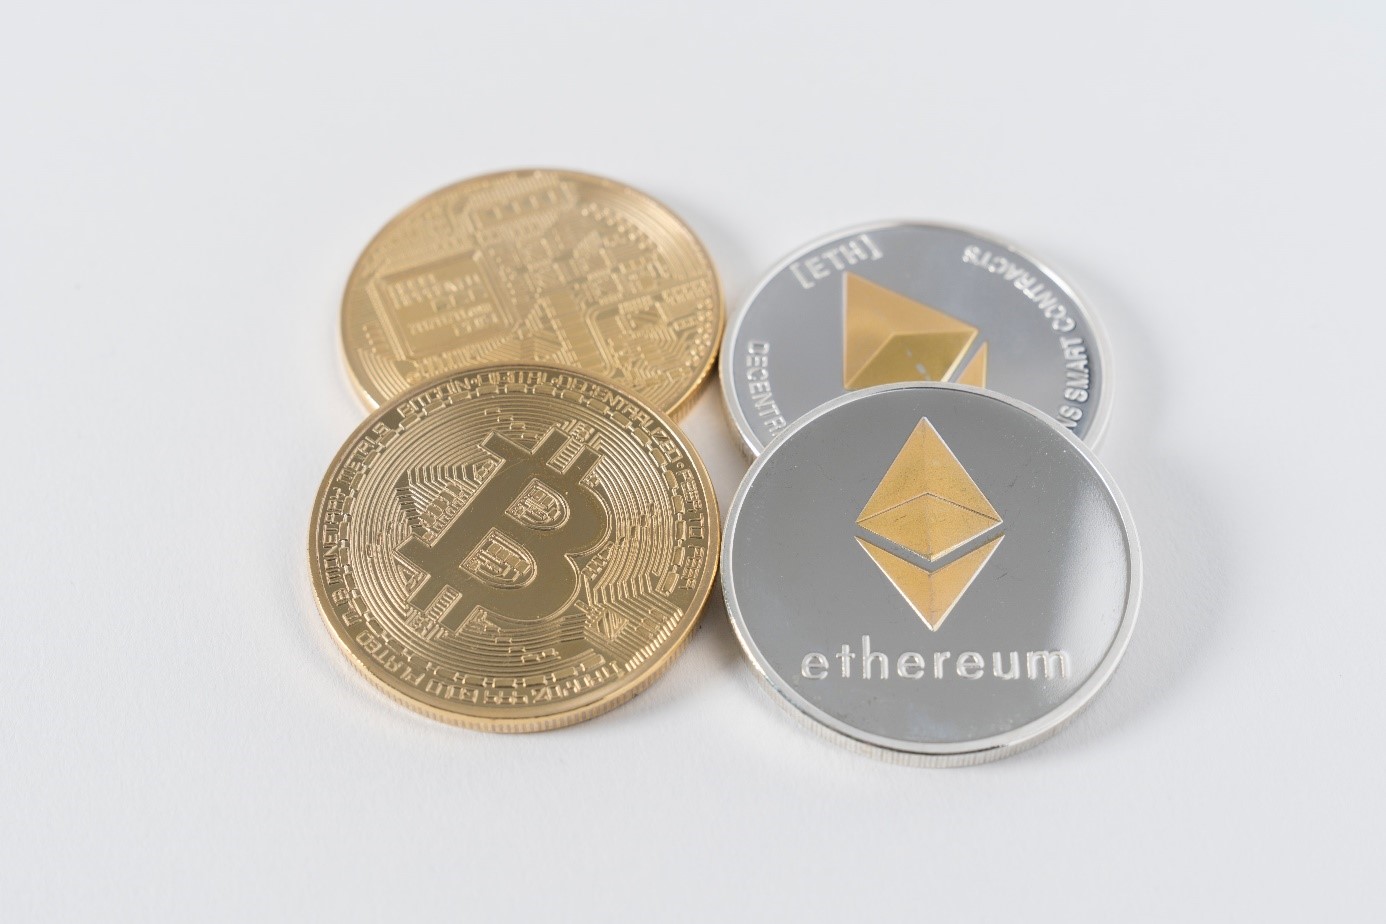 Will Ethereum overtake Bitcoin in 2022?